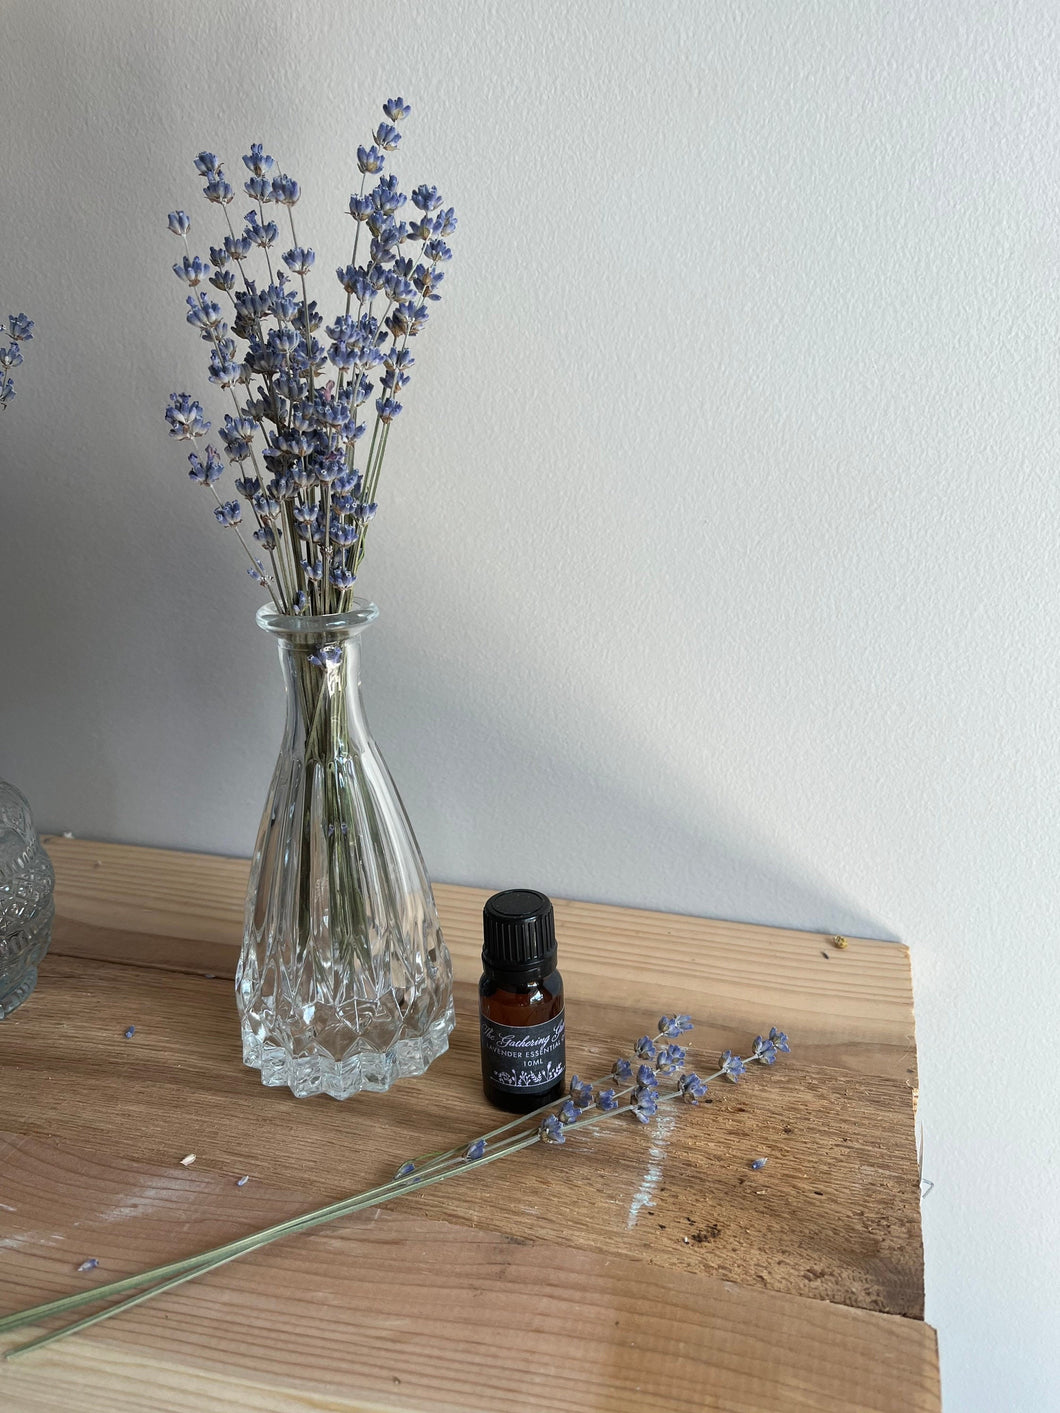 Dried lavender all natural diffuser with vintage inspired bud vase and essential oil